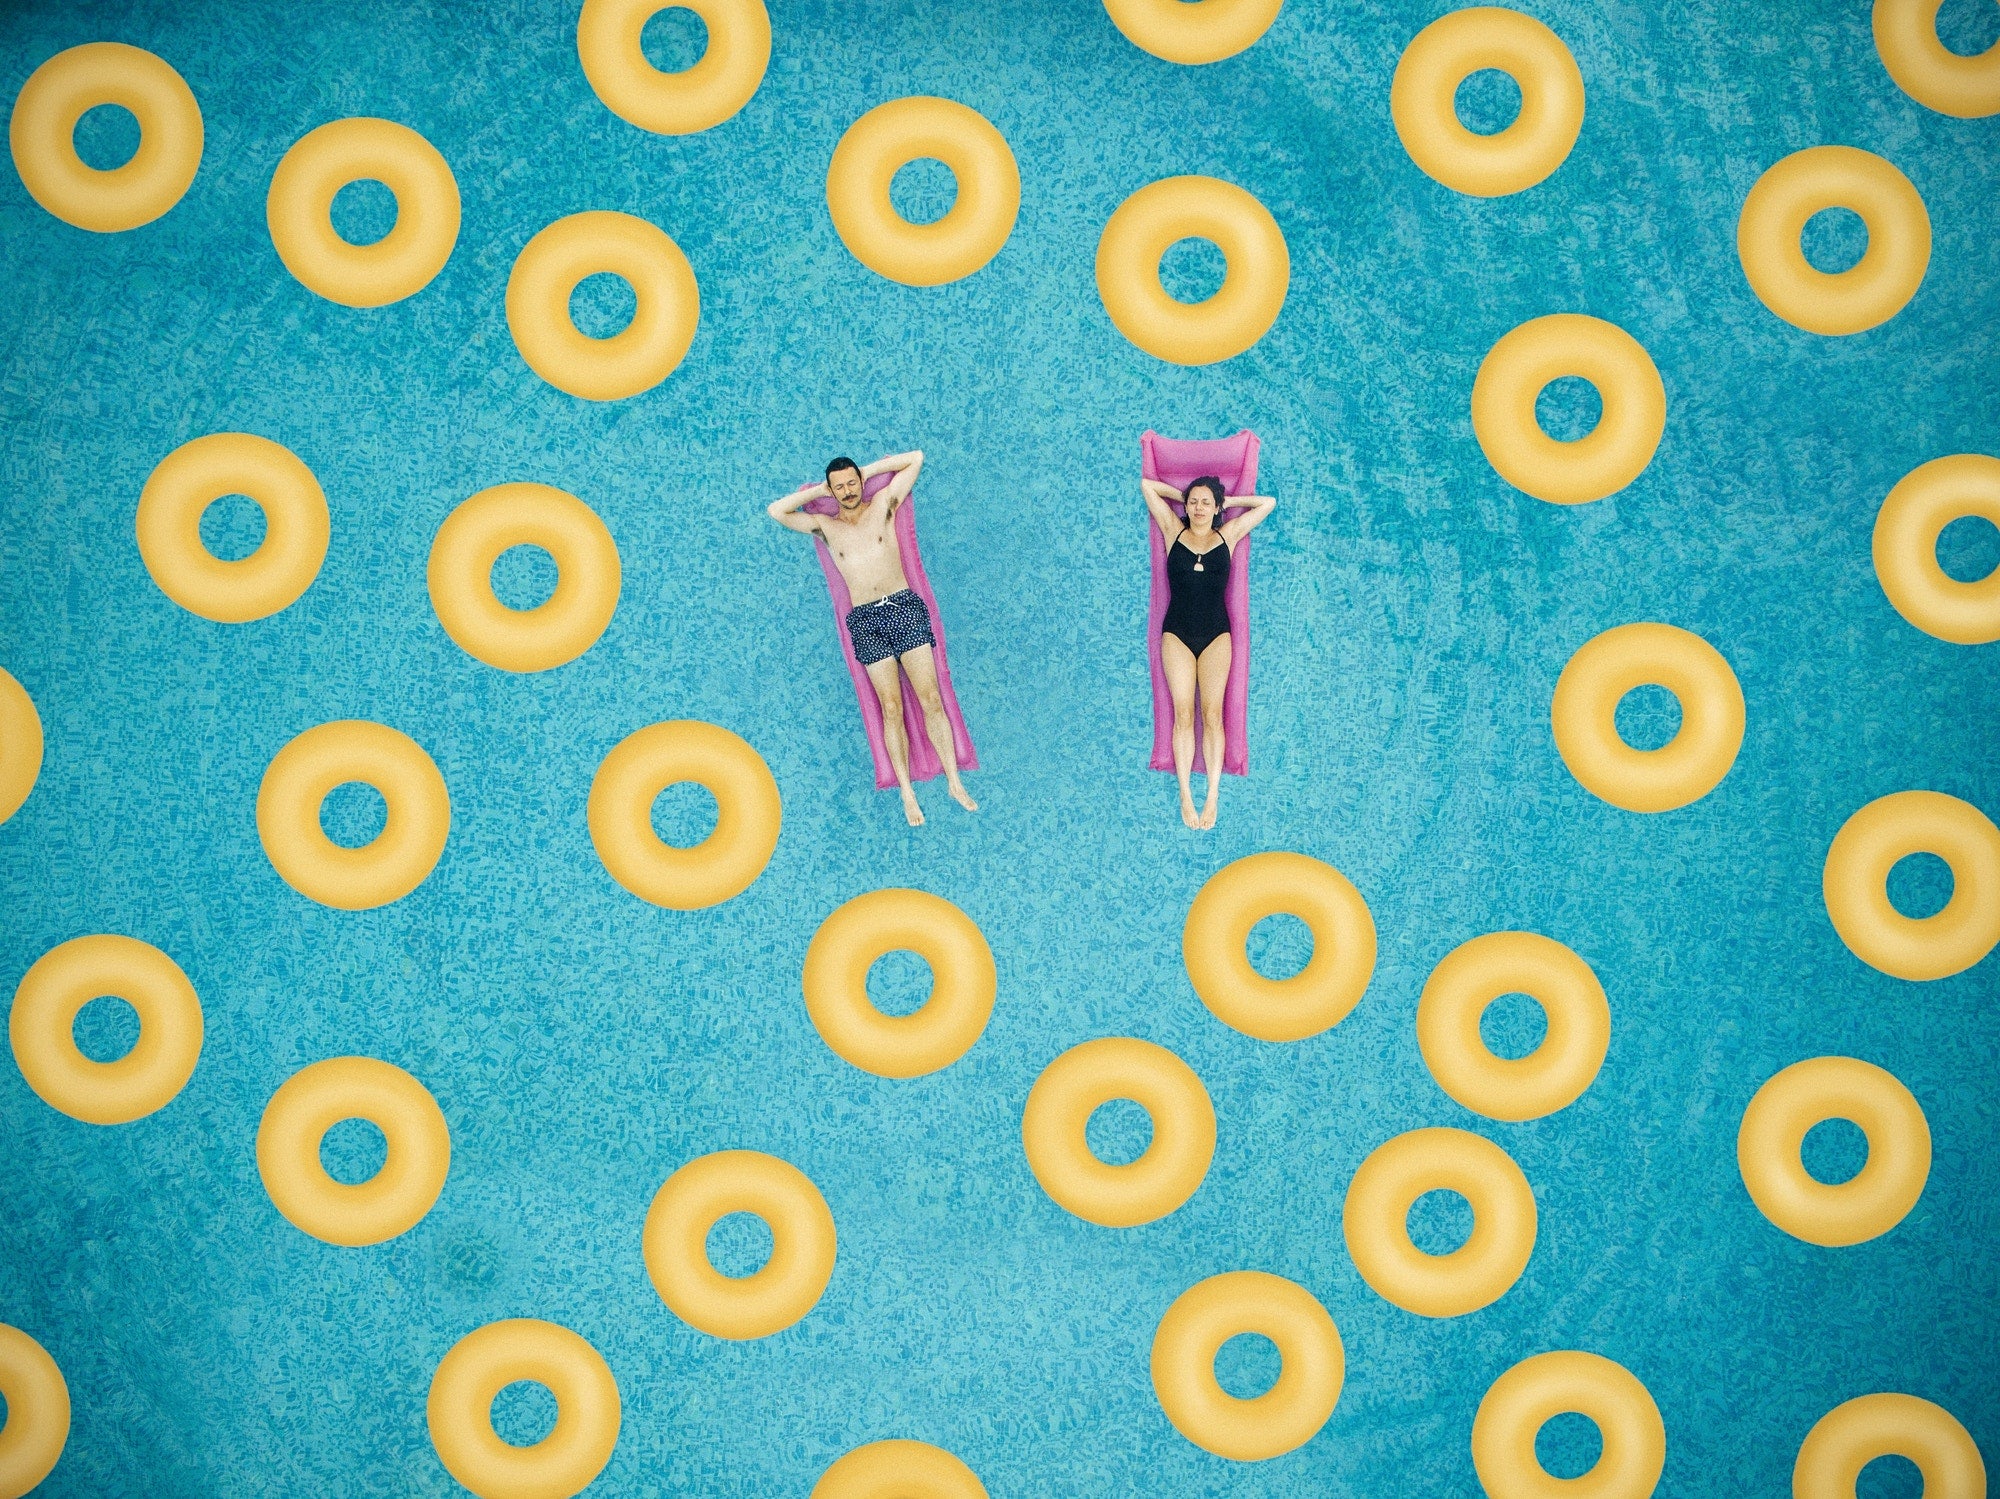 A couple in a pool full of swimming rings